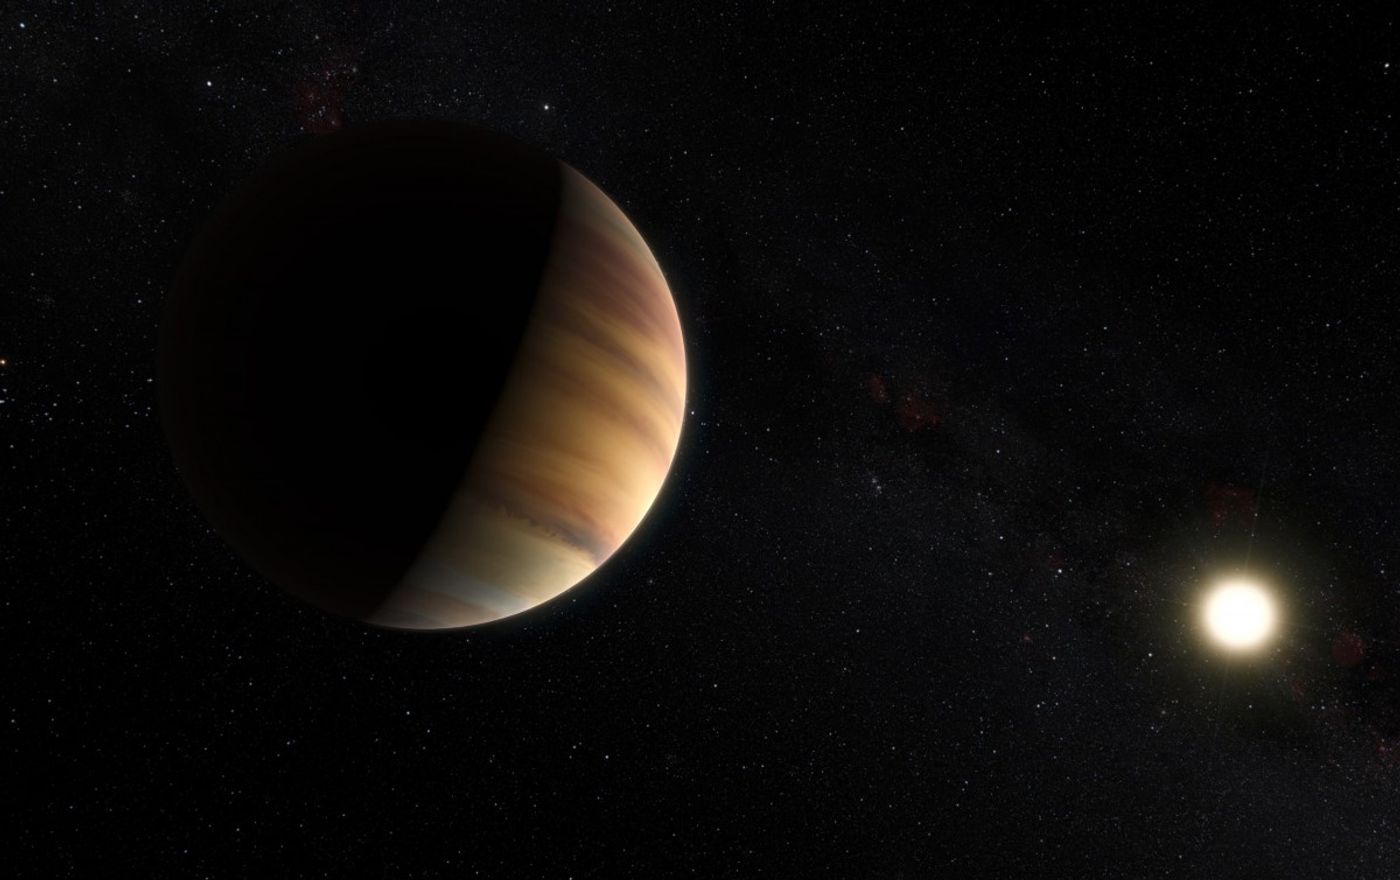 Not all recent discoveries by Kepler may actually be exoplanets as once thought.